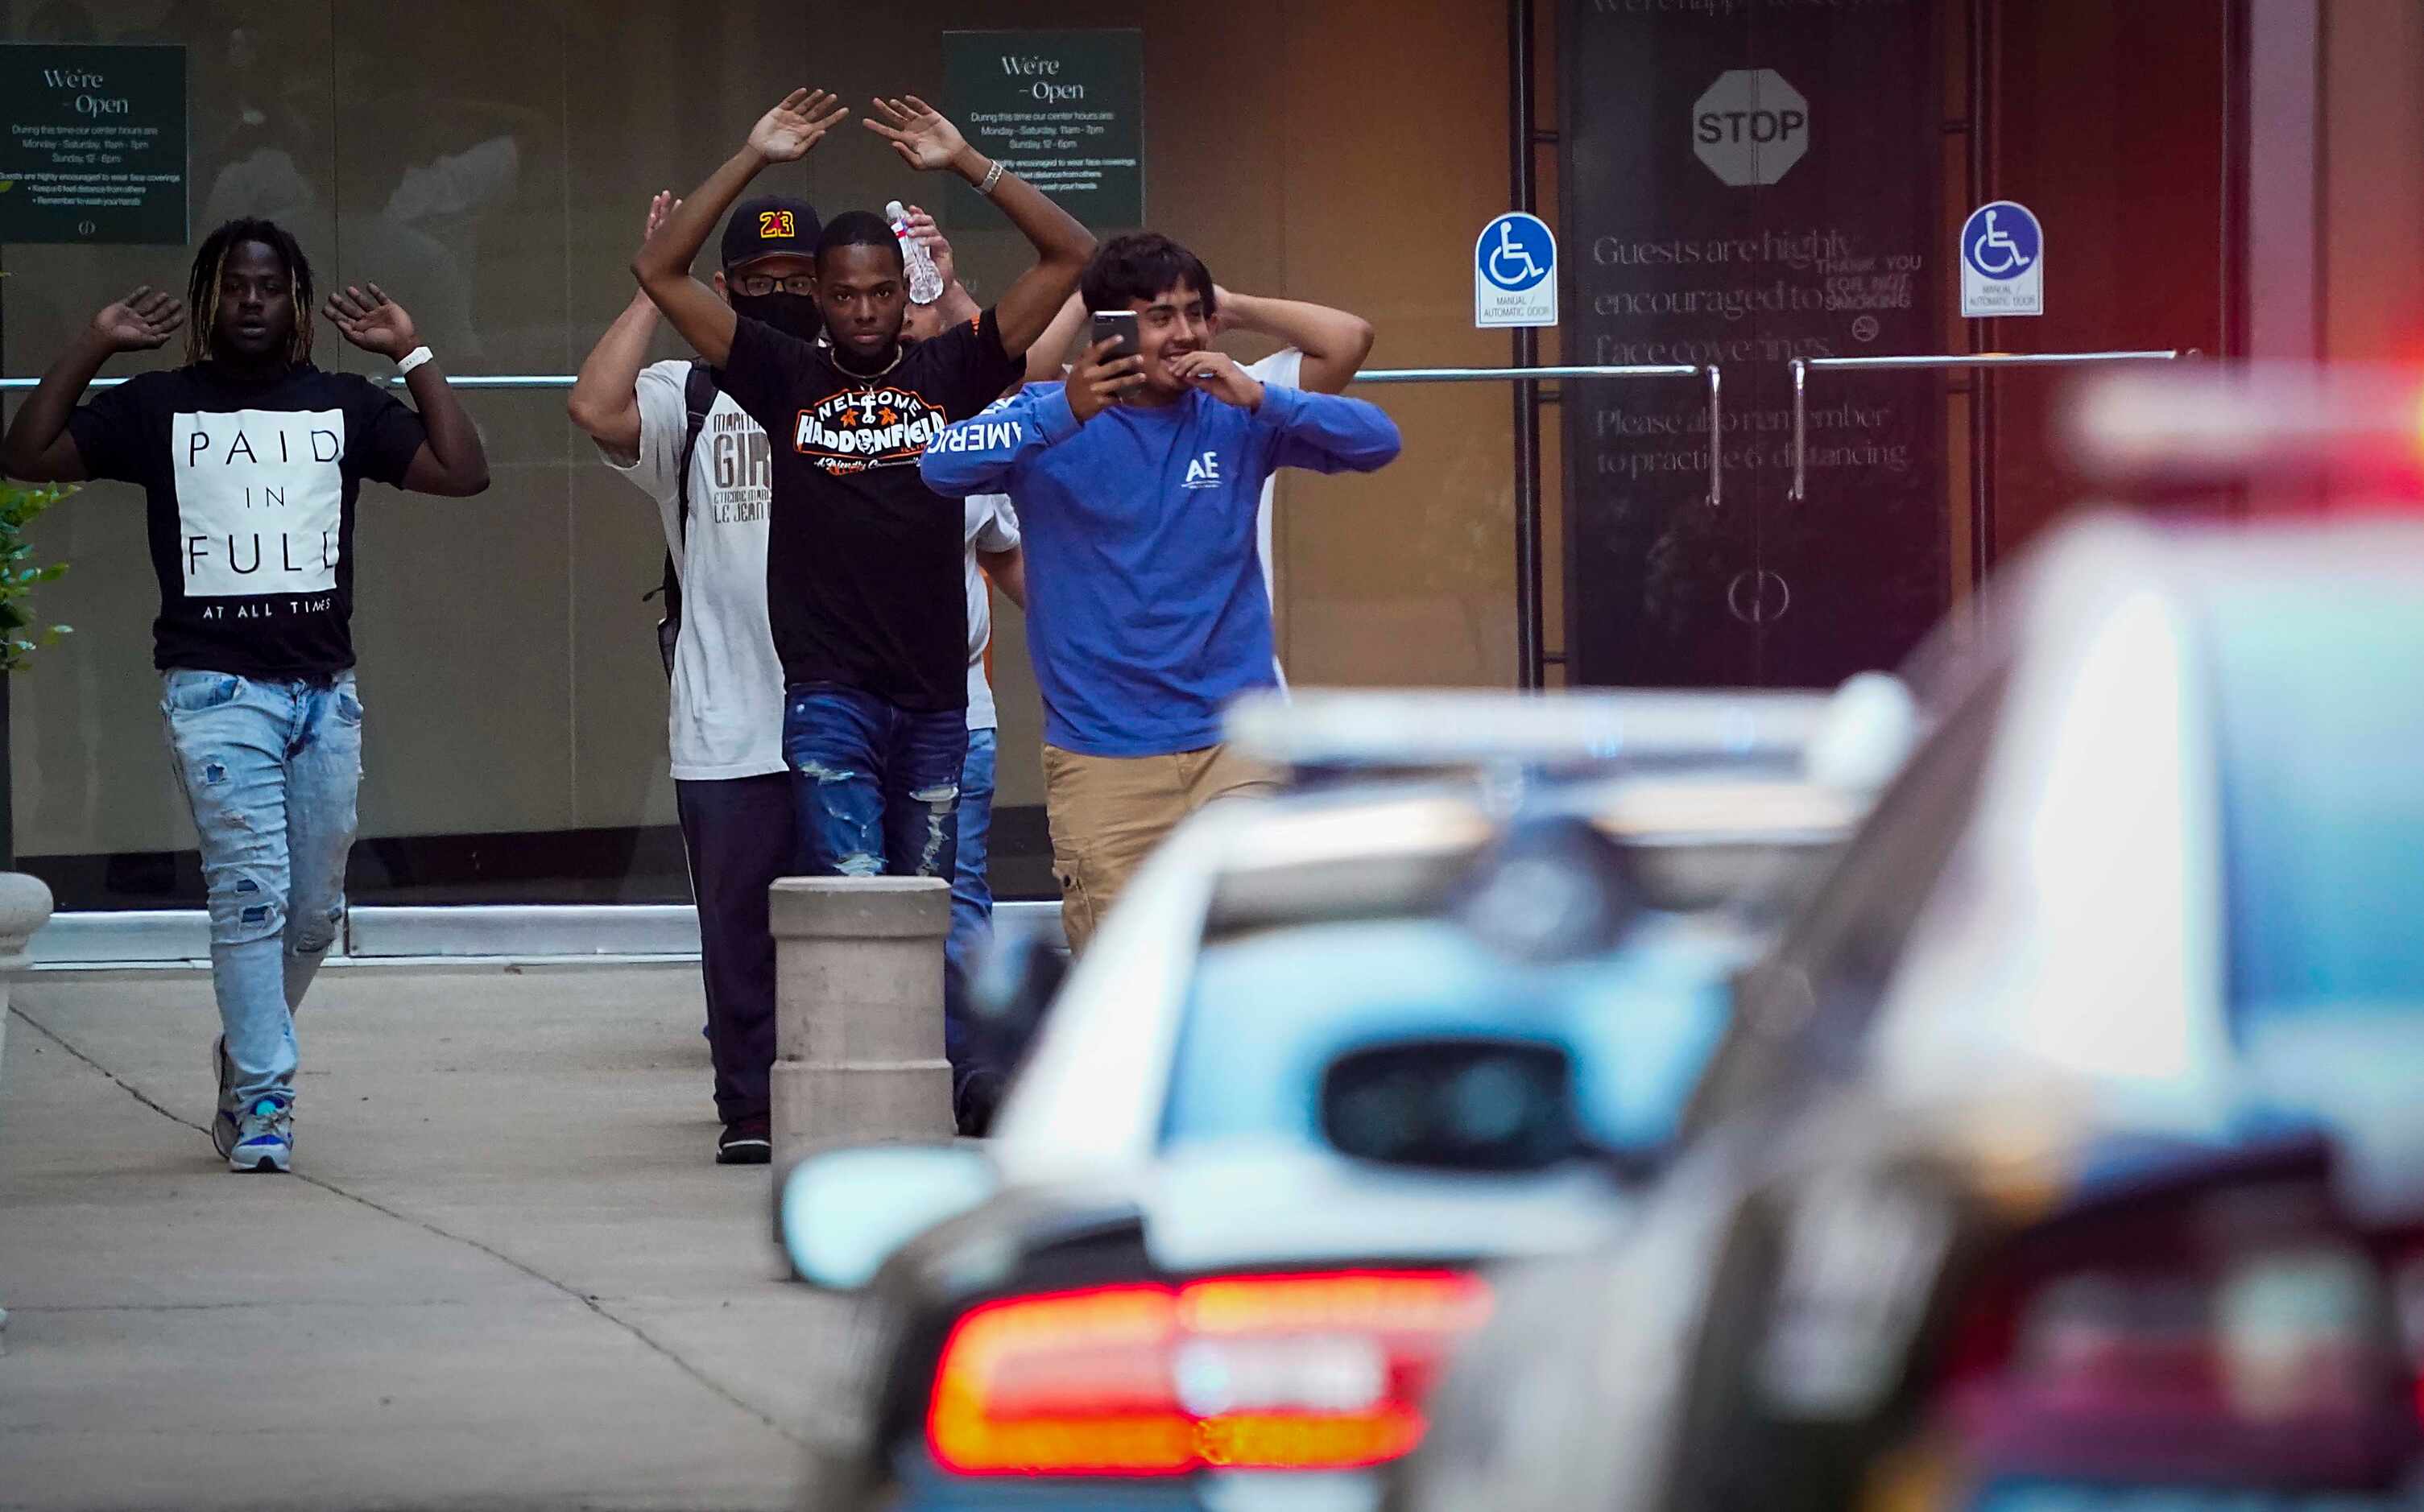 Dallas police direct people away from the Nordstrom store at the Galleria Dallas on Tuesday,...